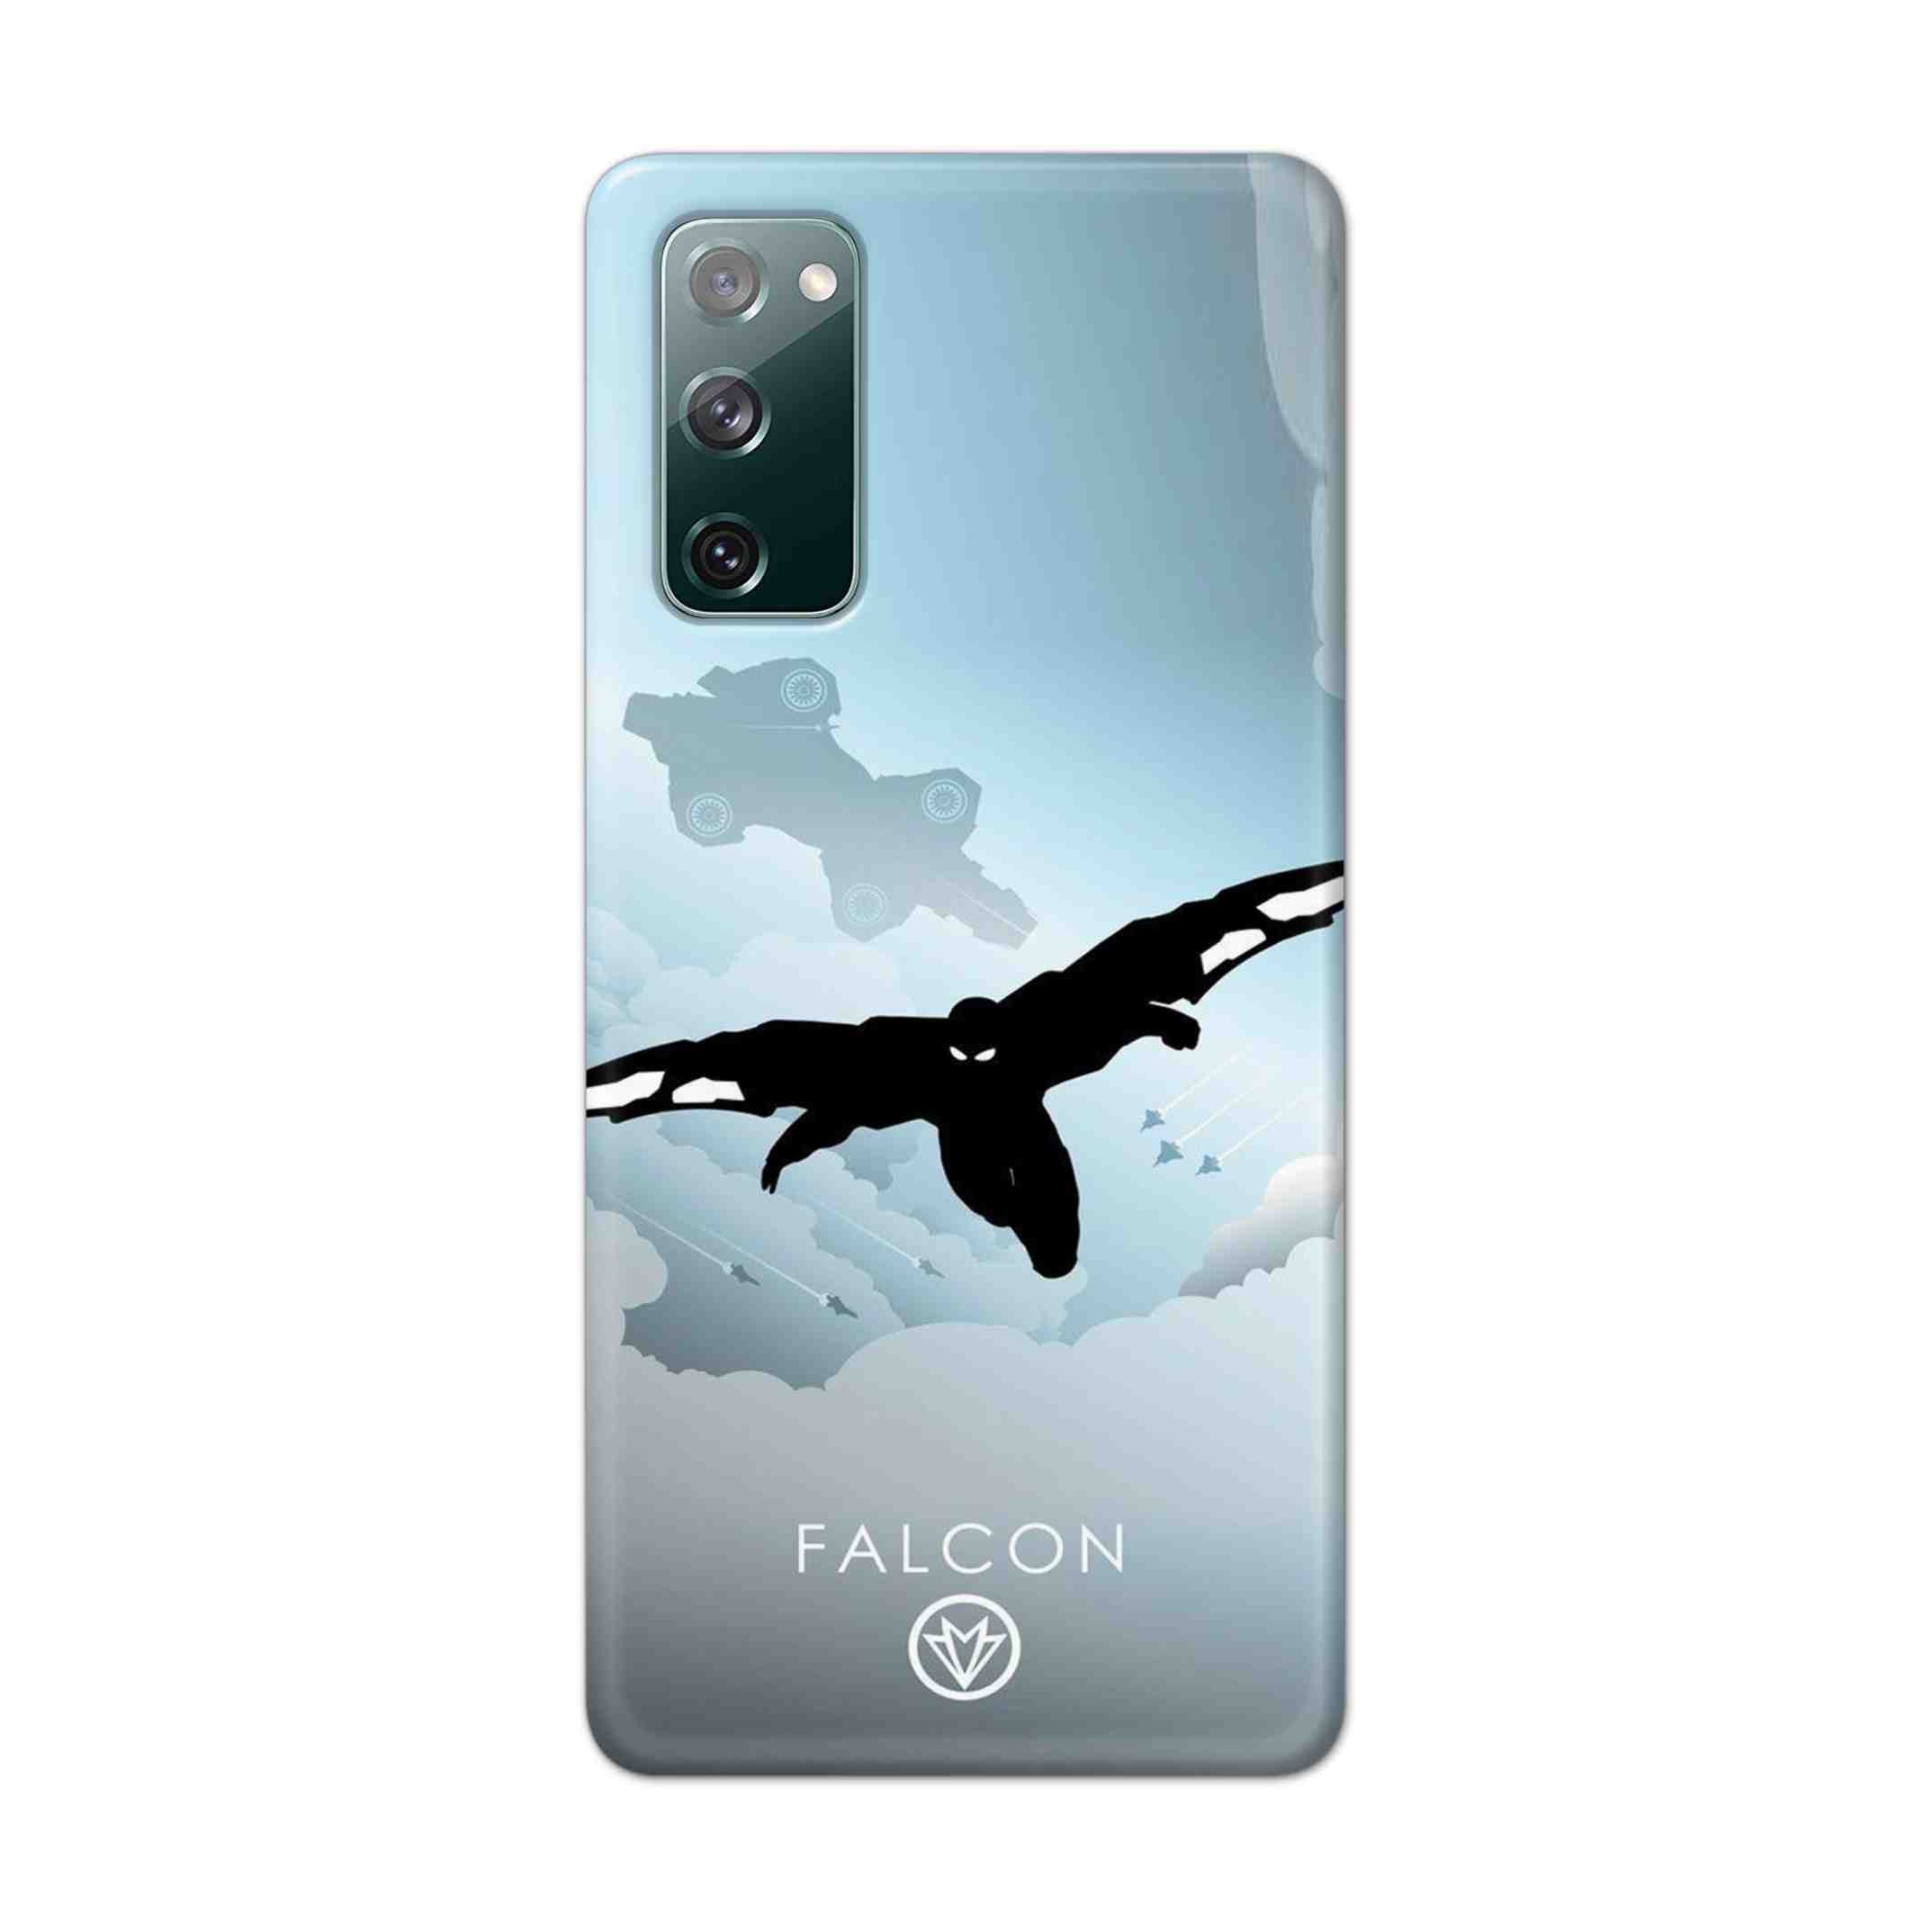 Buy Falcon Hard Back Mobile Phone Case Cover For Samsung Galaxy S20 FE Online